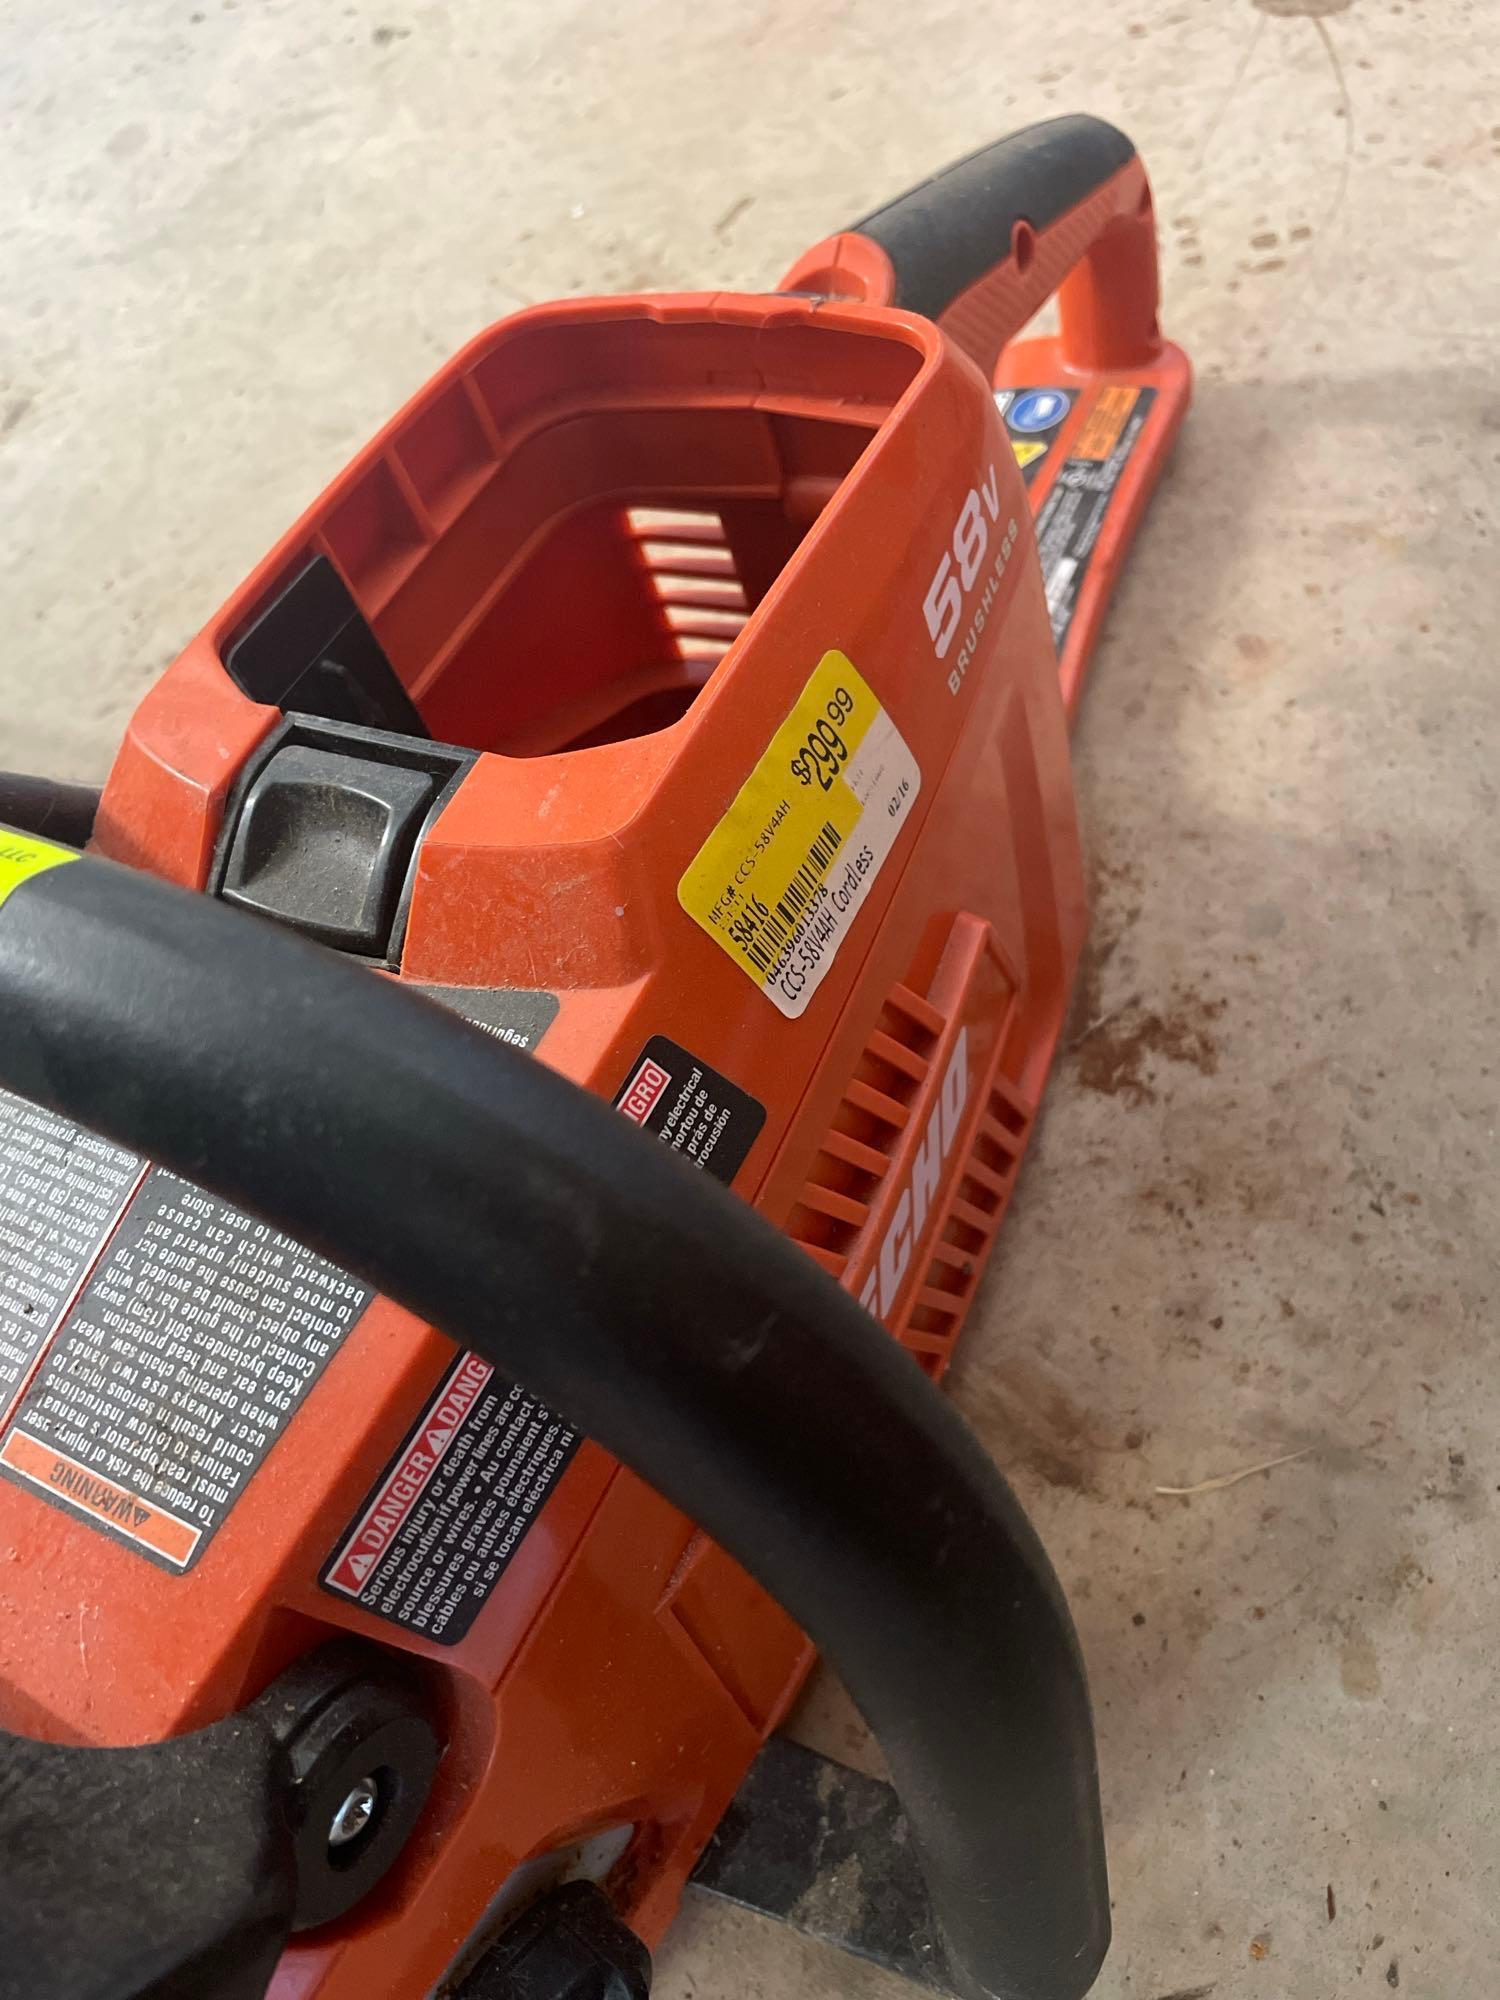 echo 58v battery powered chainsaw